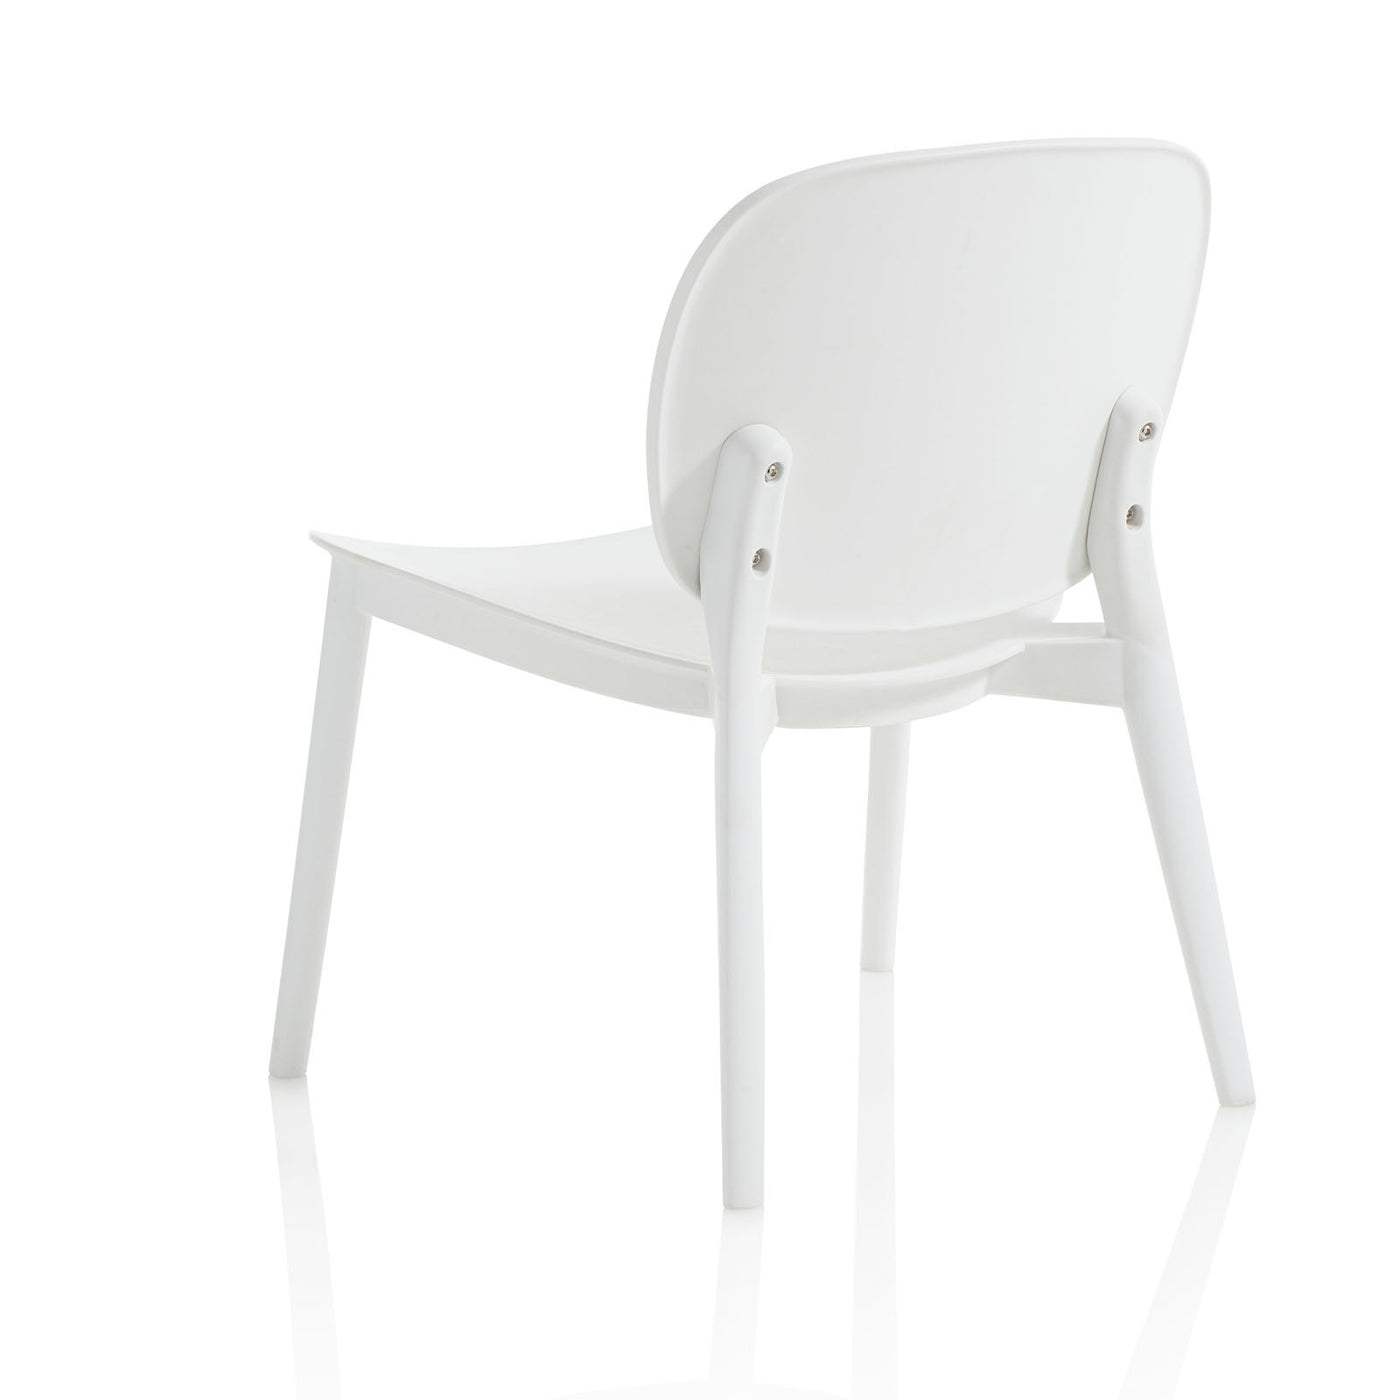 Set 2 MAHON white indoor/outdoor chairs